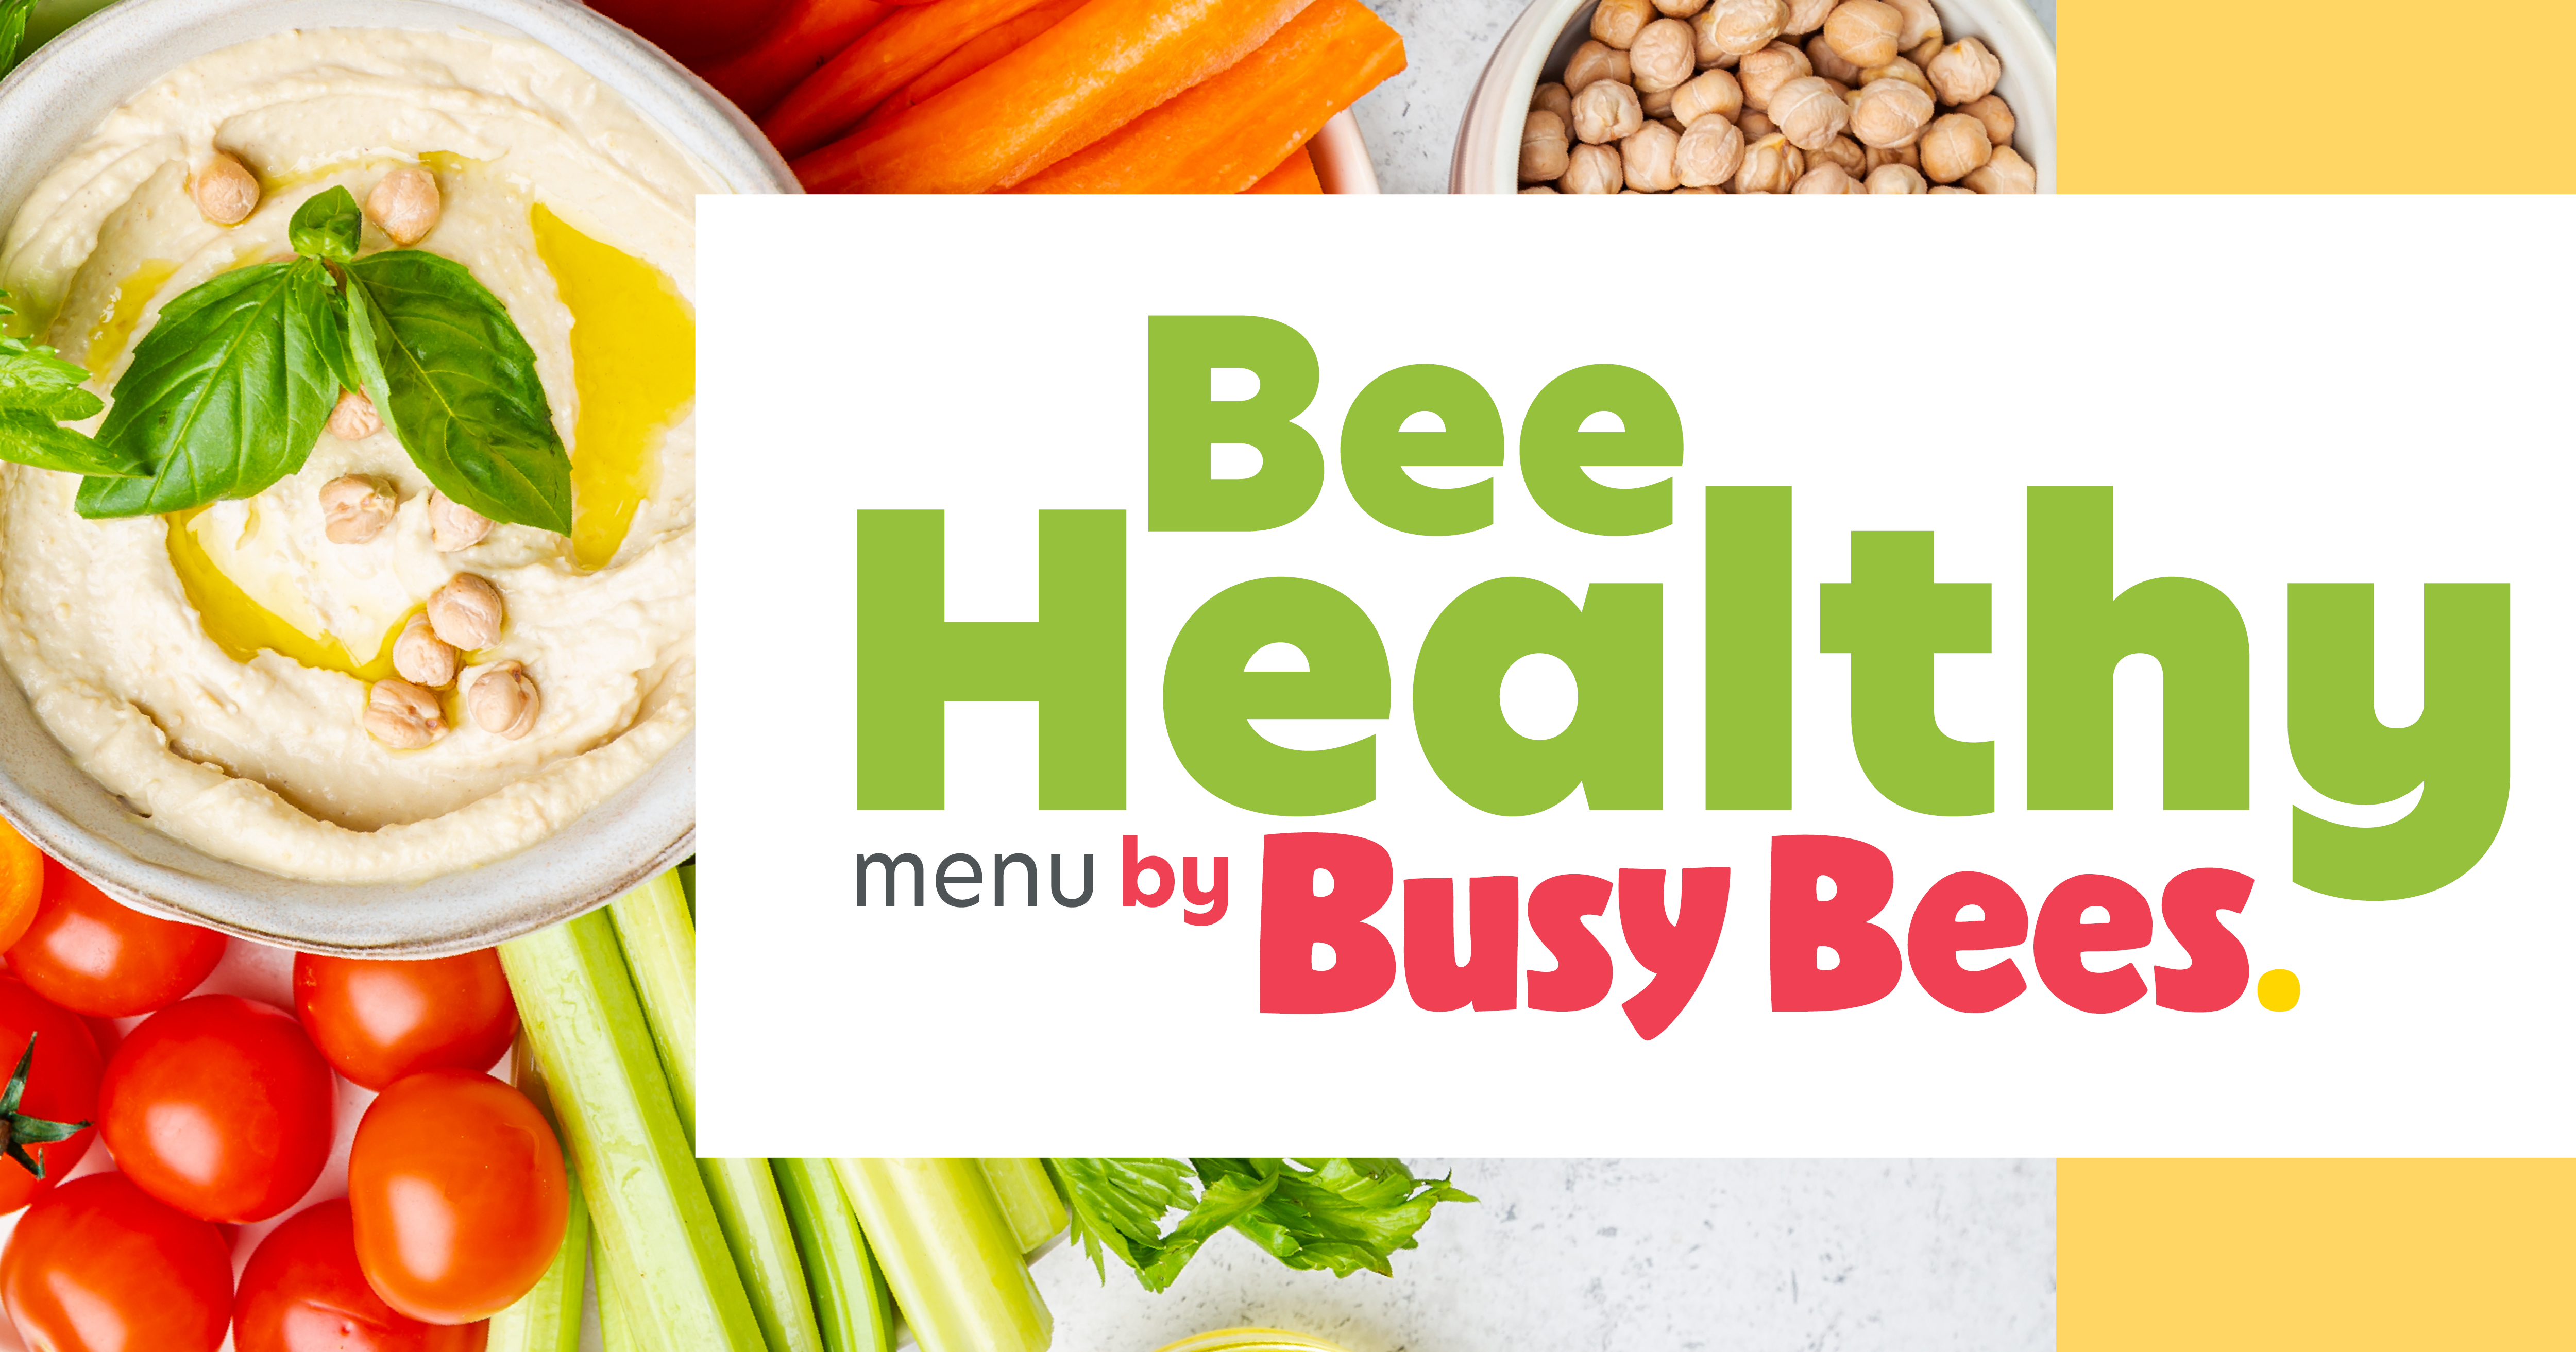 Dip with sliced vegetable with overlay text saying "Bee Healthy Menu by Busy Bees"